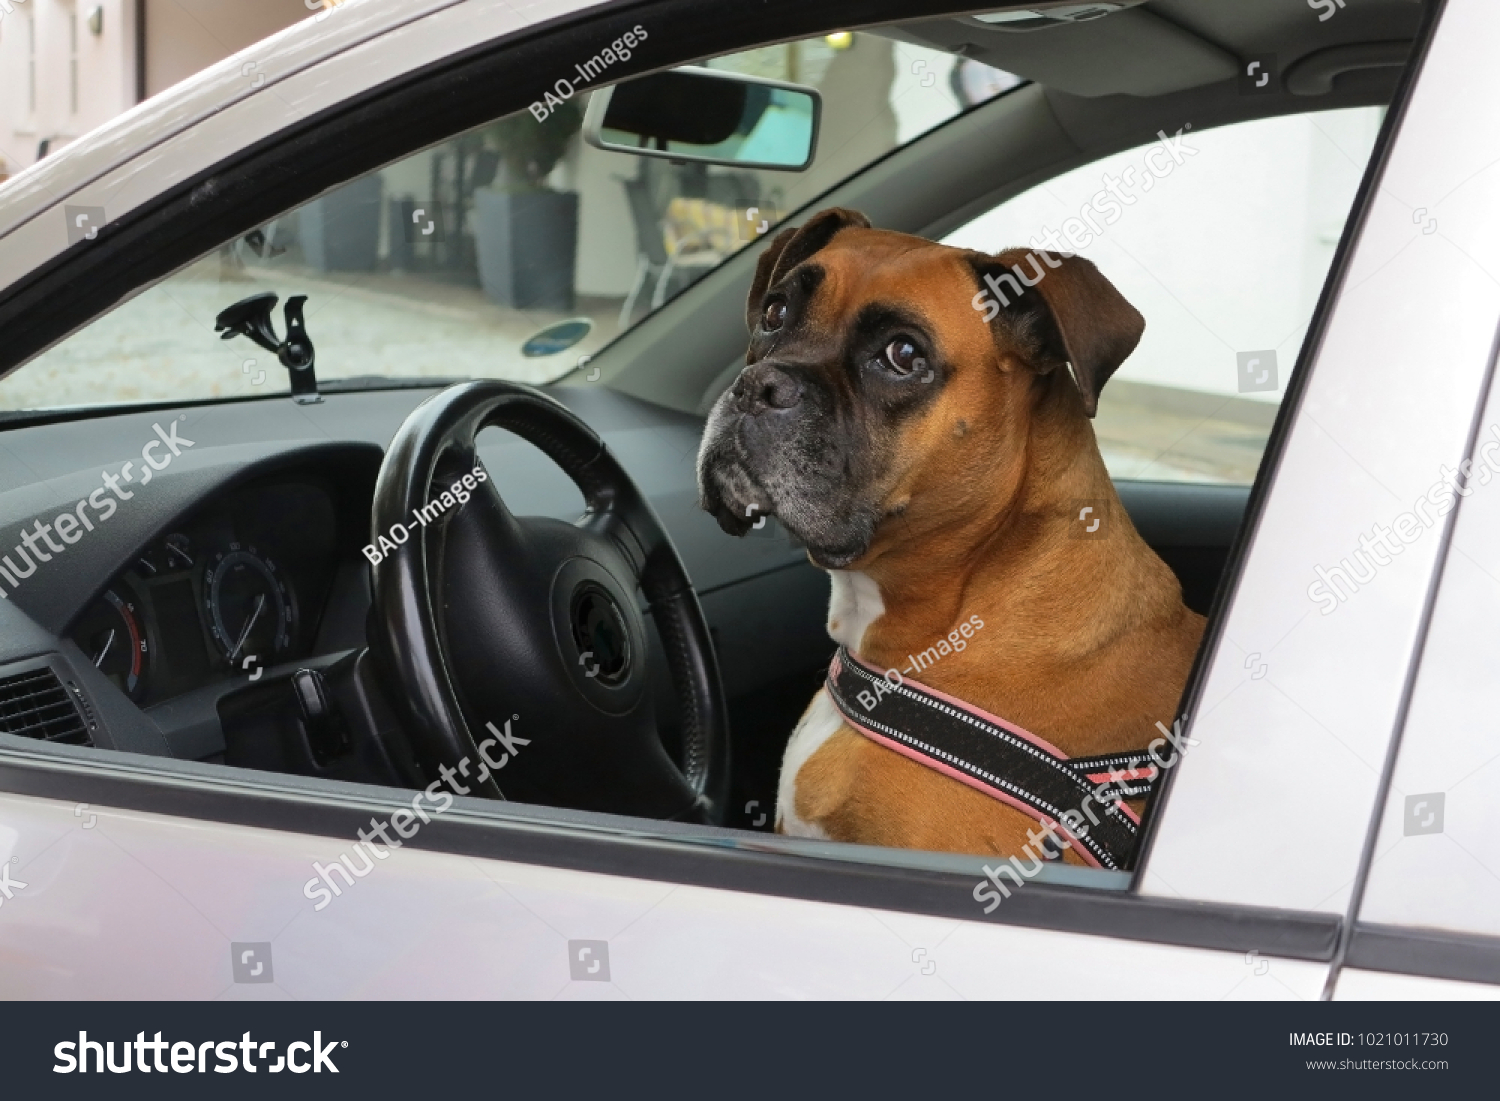 can dogs sit in the front seat of a car